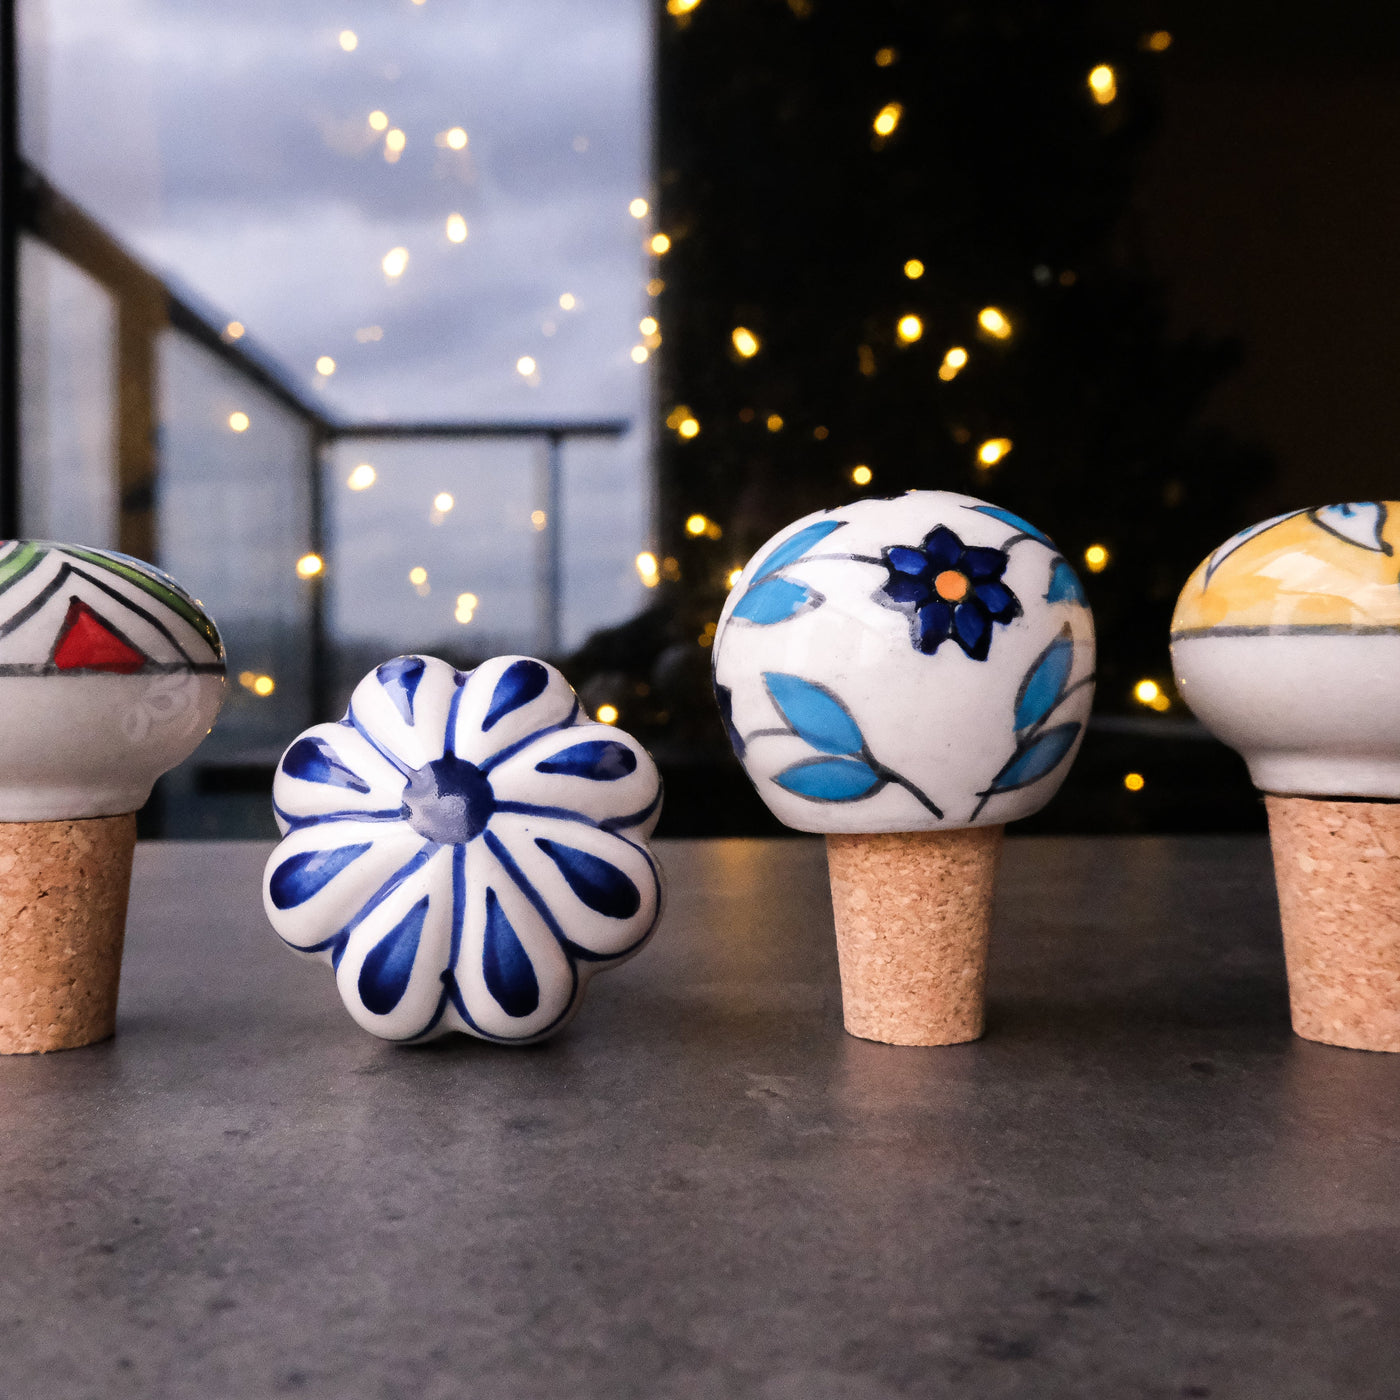 Outdoor scene of hand painted ceramic bottle stoppers with cork bases, blue, yellow, green and red colors